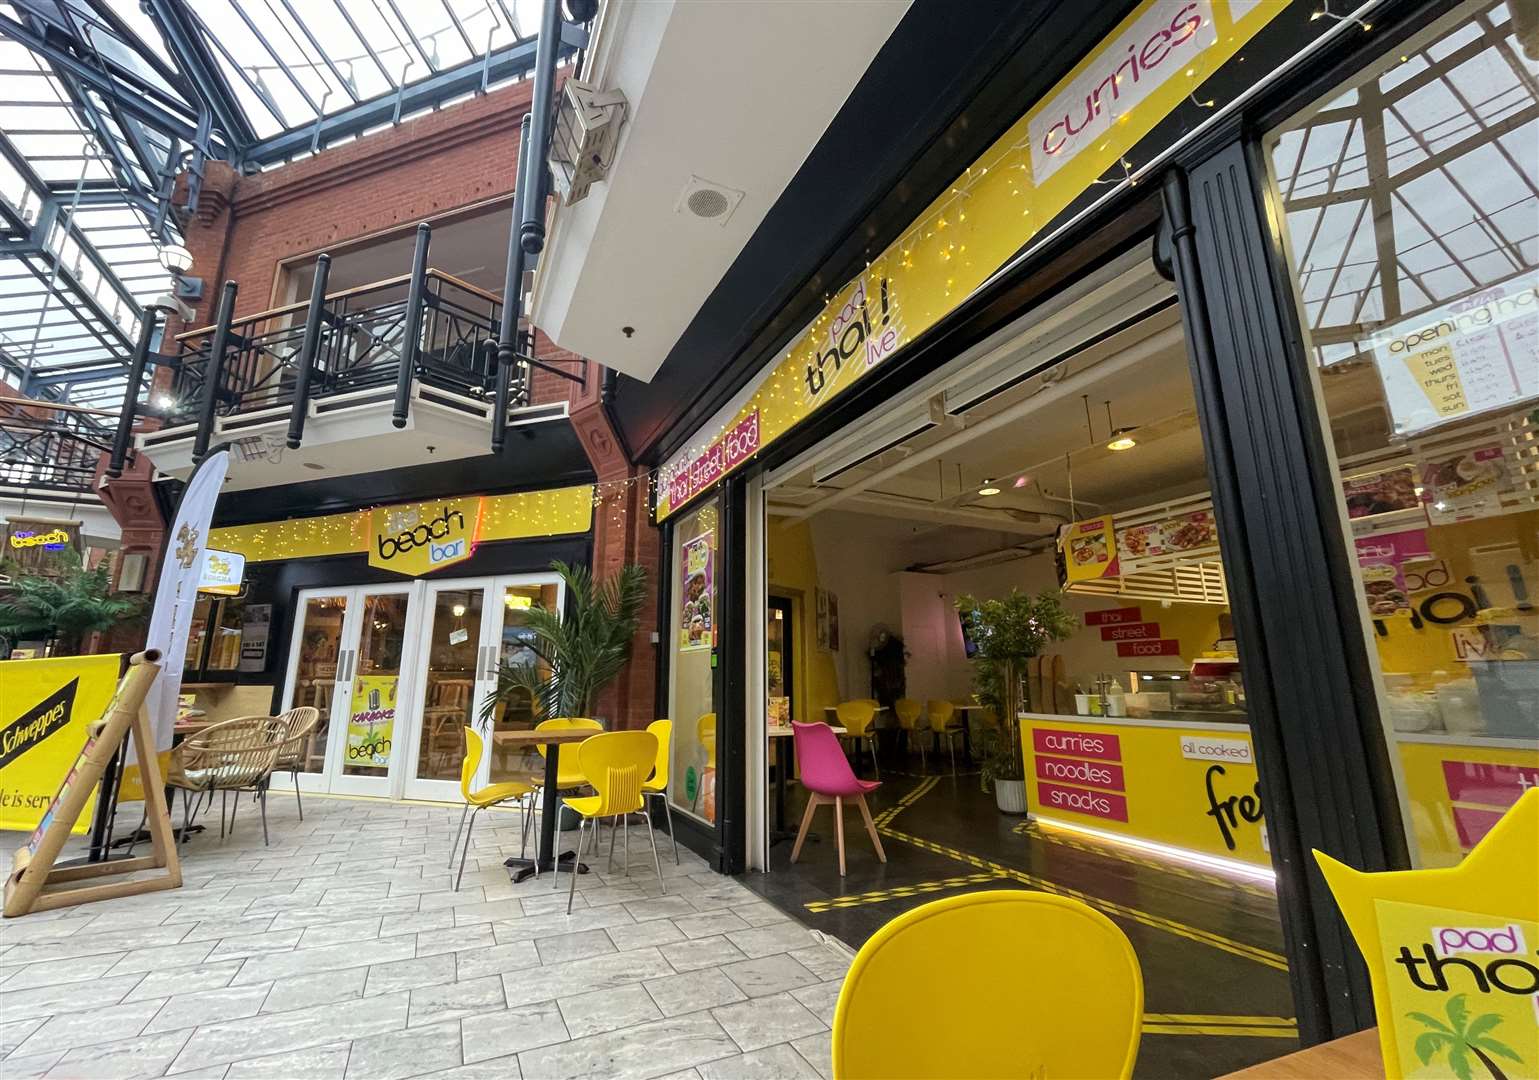 Pad Thai Live and the Beach Bar at the Royal Star Arcade shopping centre in Maidstone